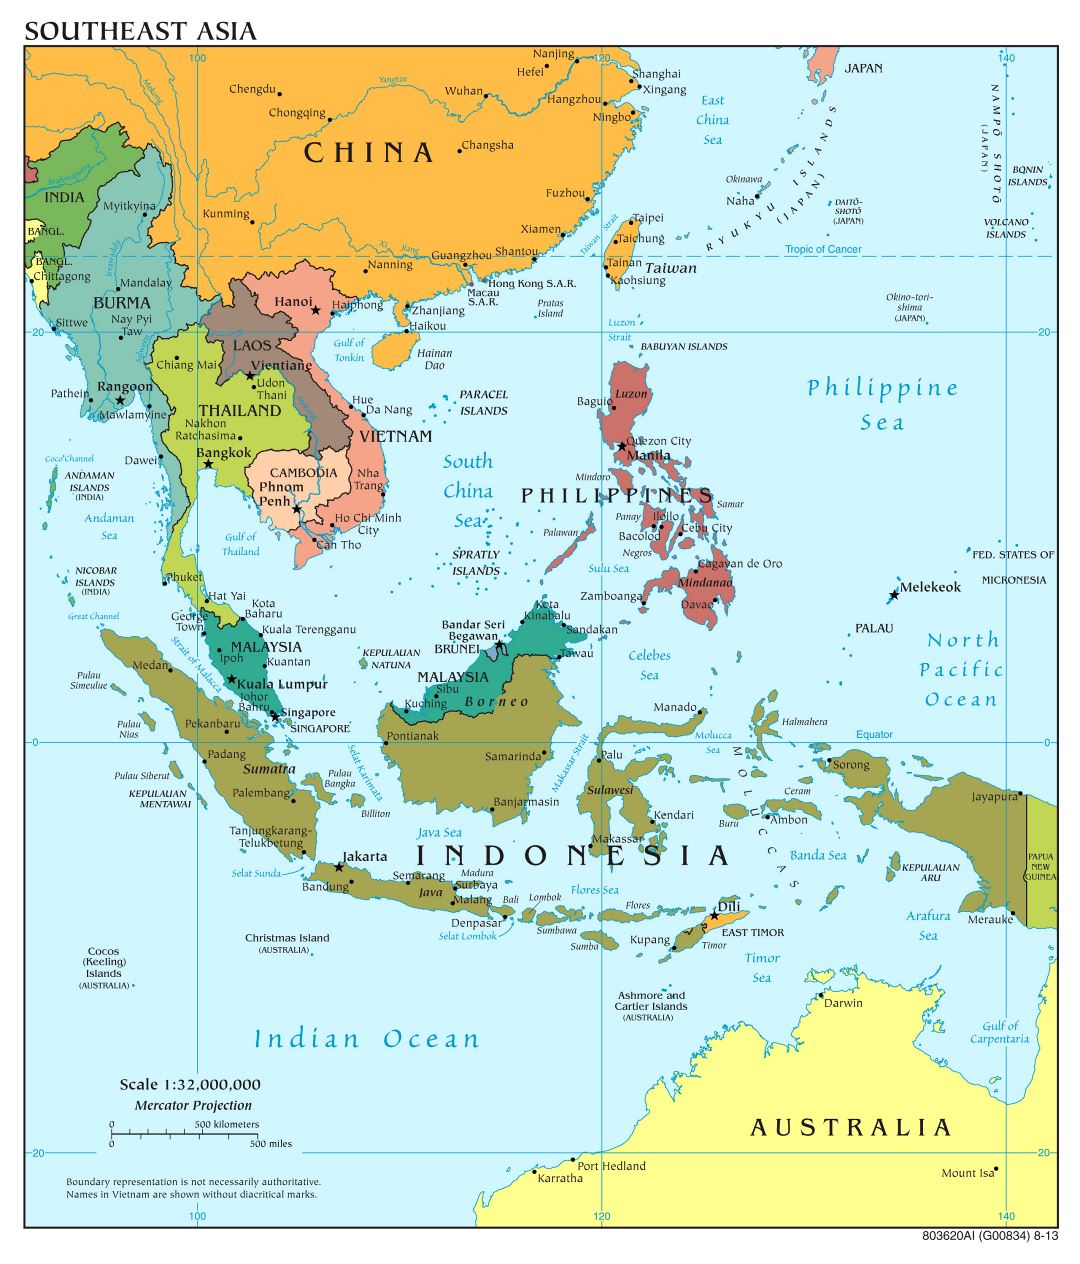 Large scale political map of Southeast Asia with capitals and major cities - 2013